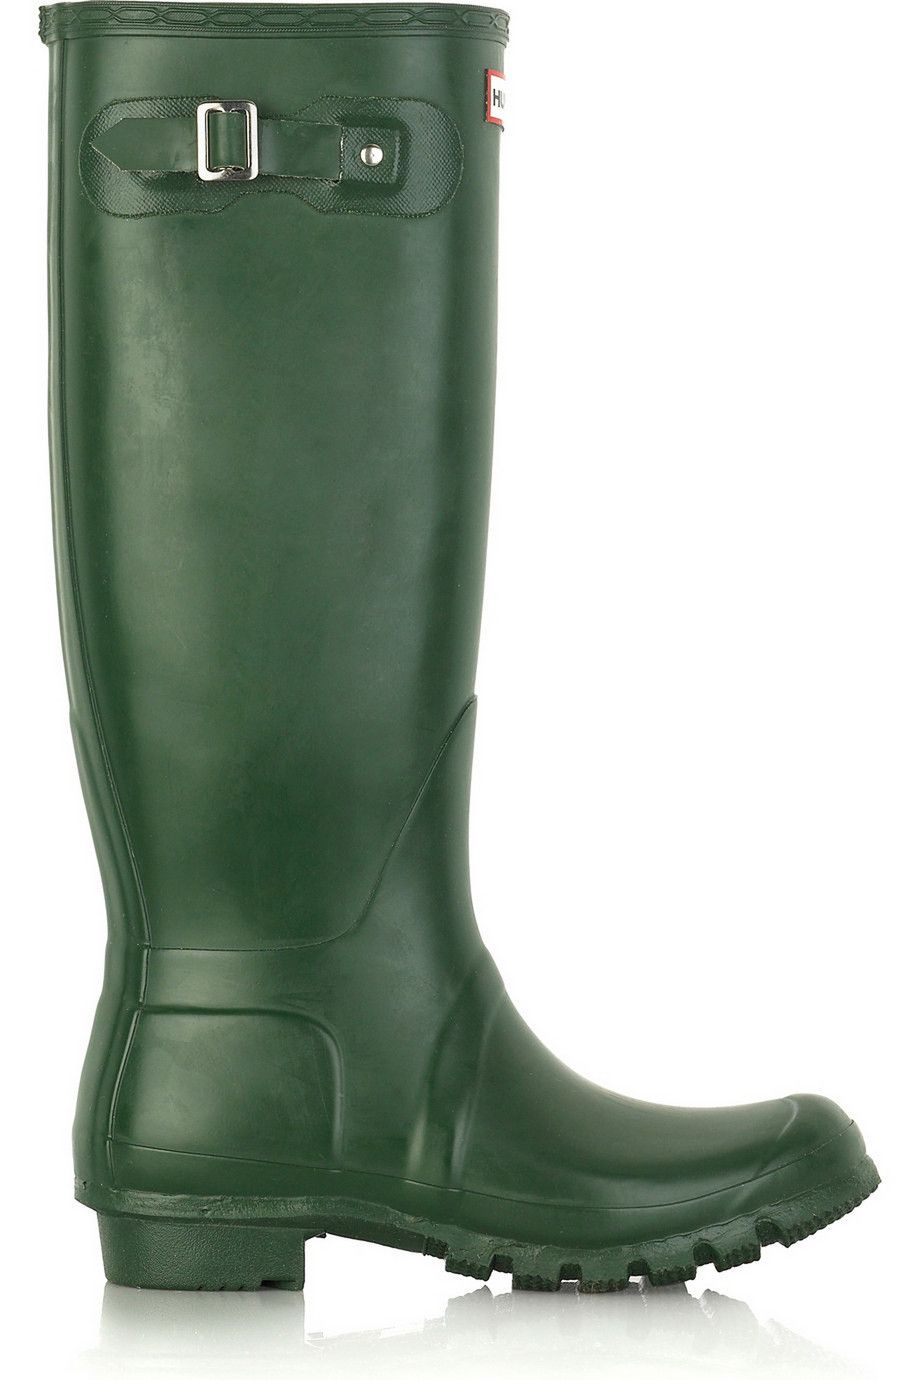 Boot, Riding boot, Leather, Knee-high boot, Motorcycle boot, Rain boot, Work boots, 